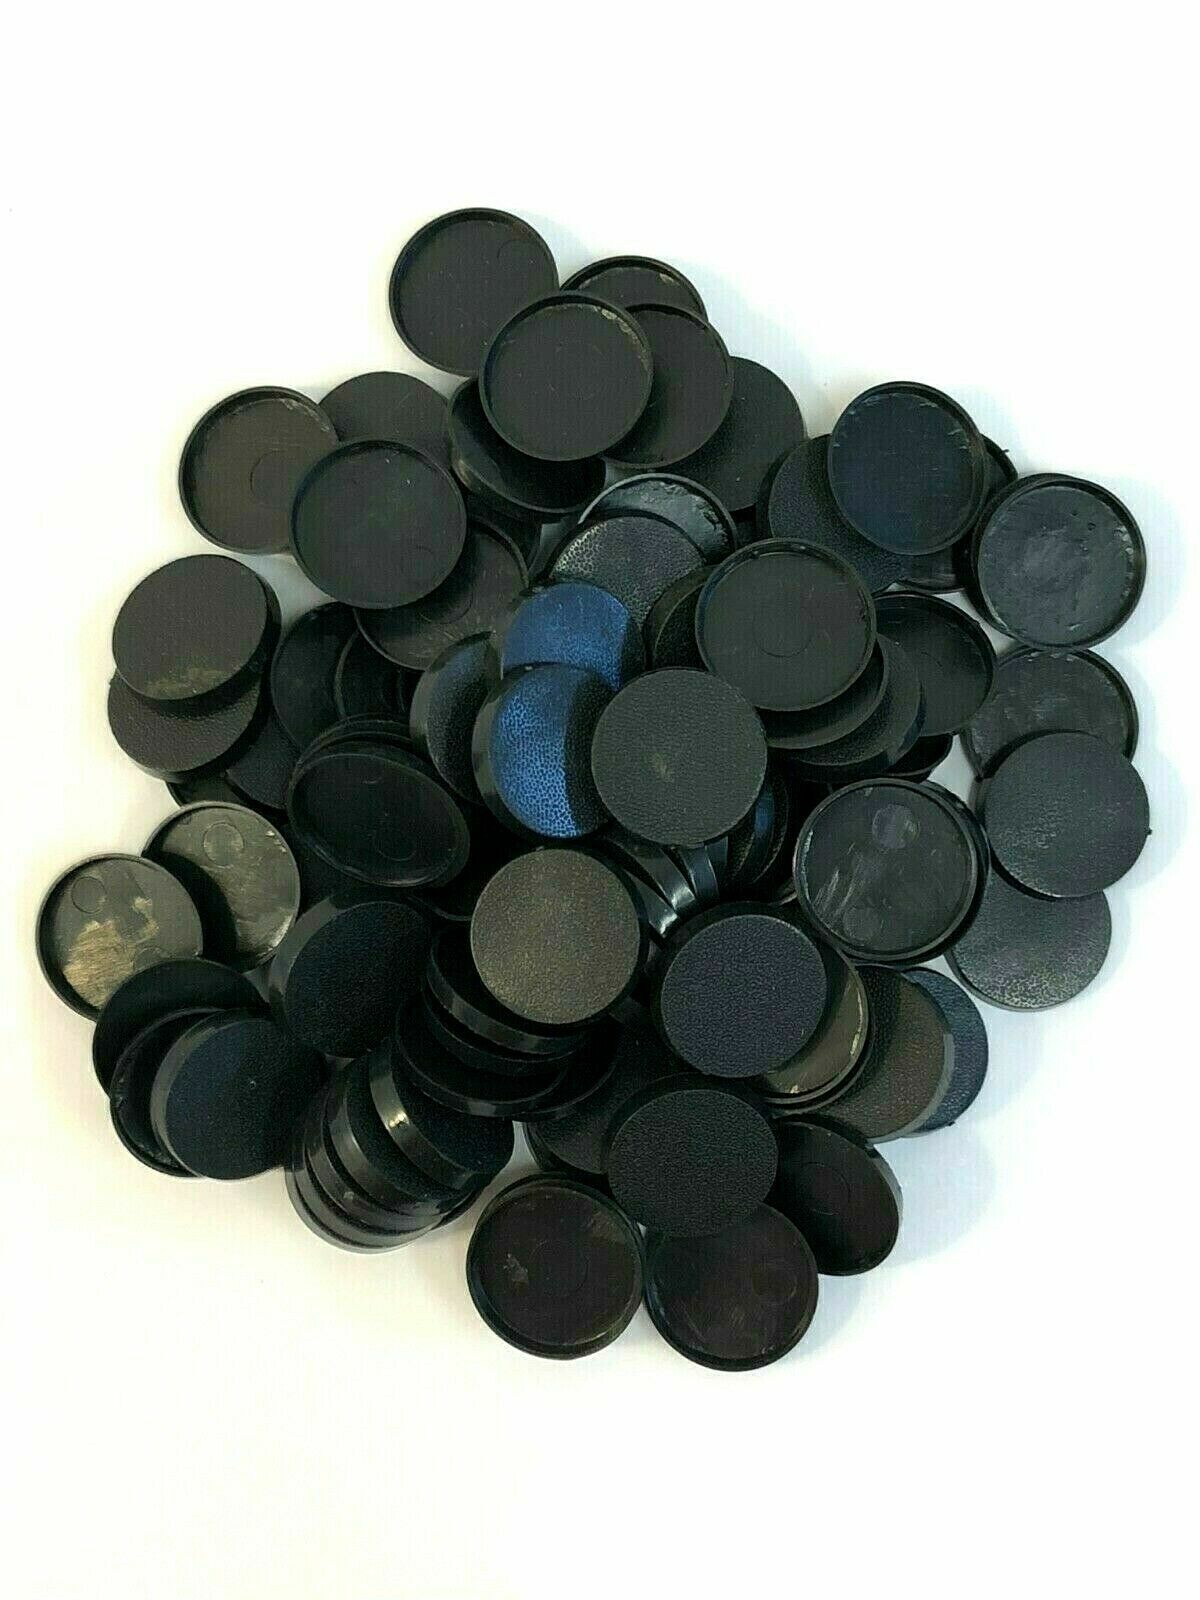 Lot Of 100 25mm Round Bases For Warhammer 40k & AoS Games Workshop Bitz  Unbranded Does not Apply